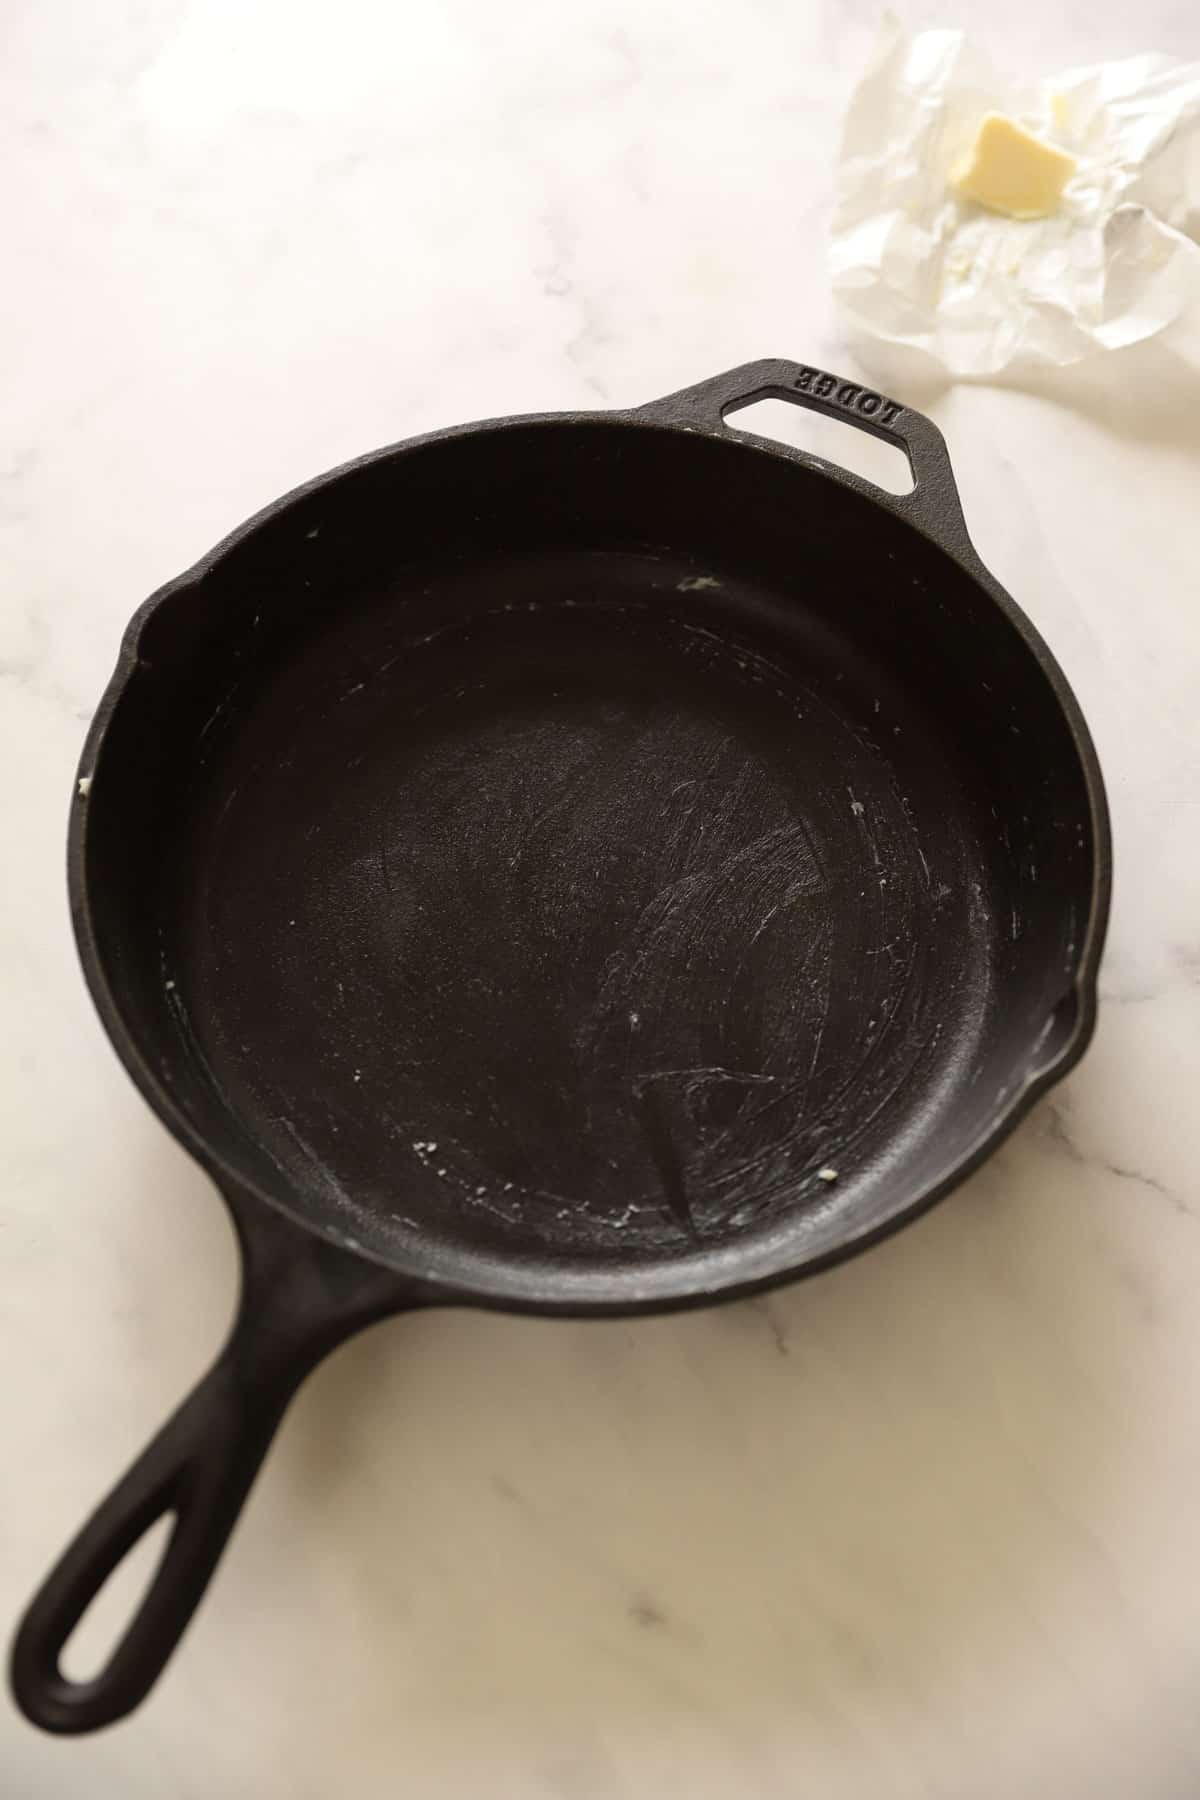 A cast-iron skillet buttered